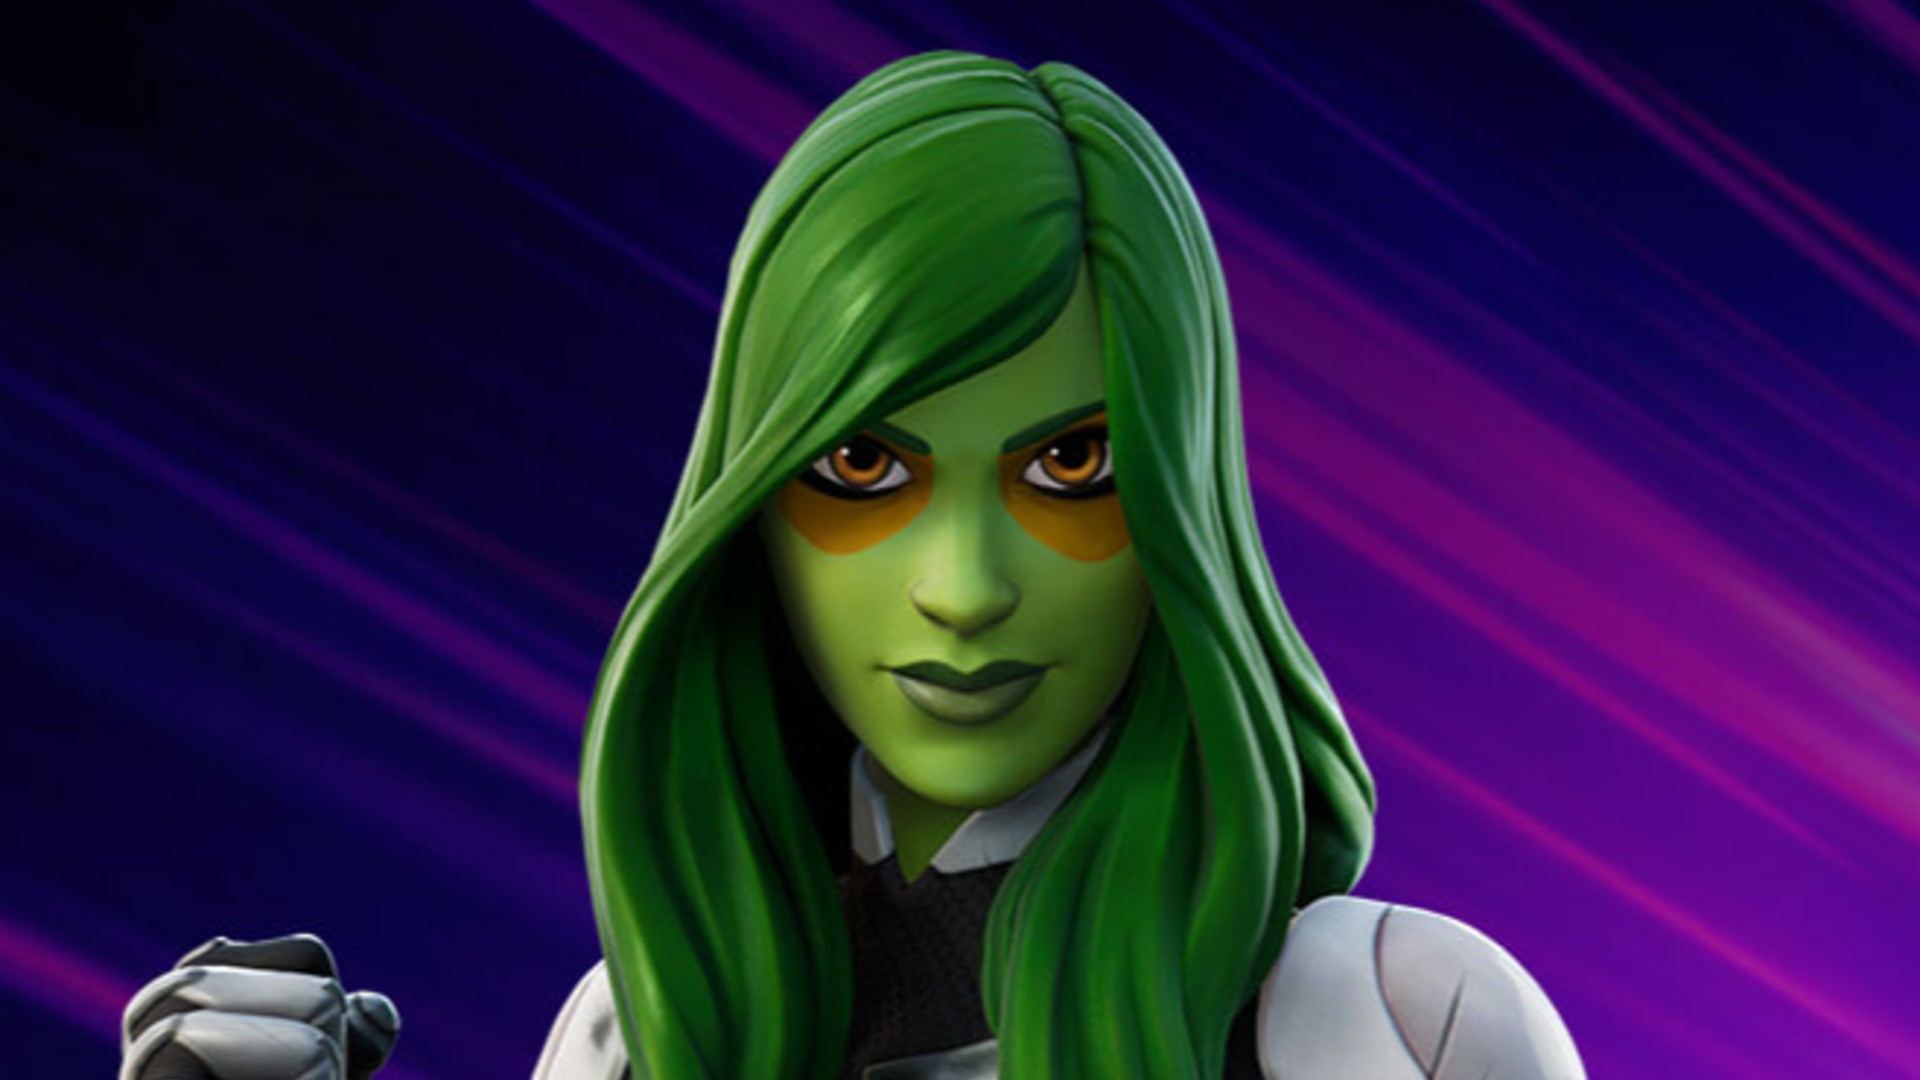 Gamora Fortnite skin: Everything we know about the Guardian of the Galaxy character's Fortnite skin